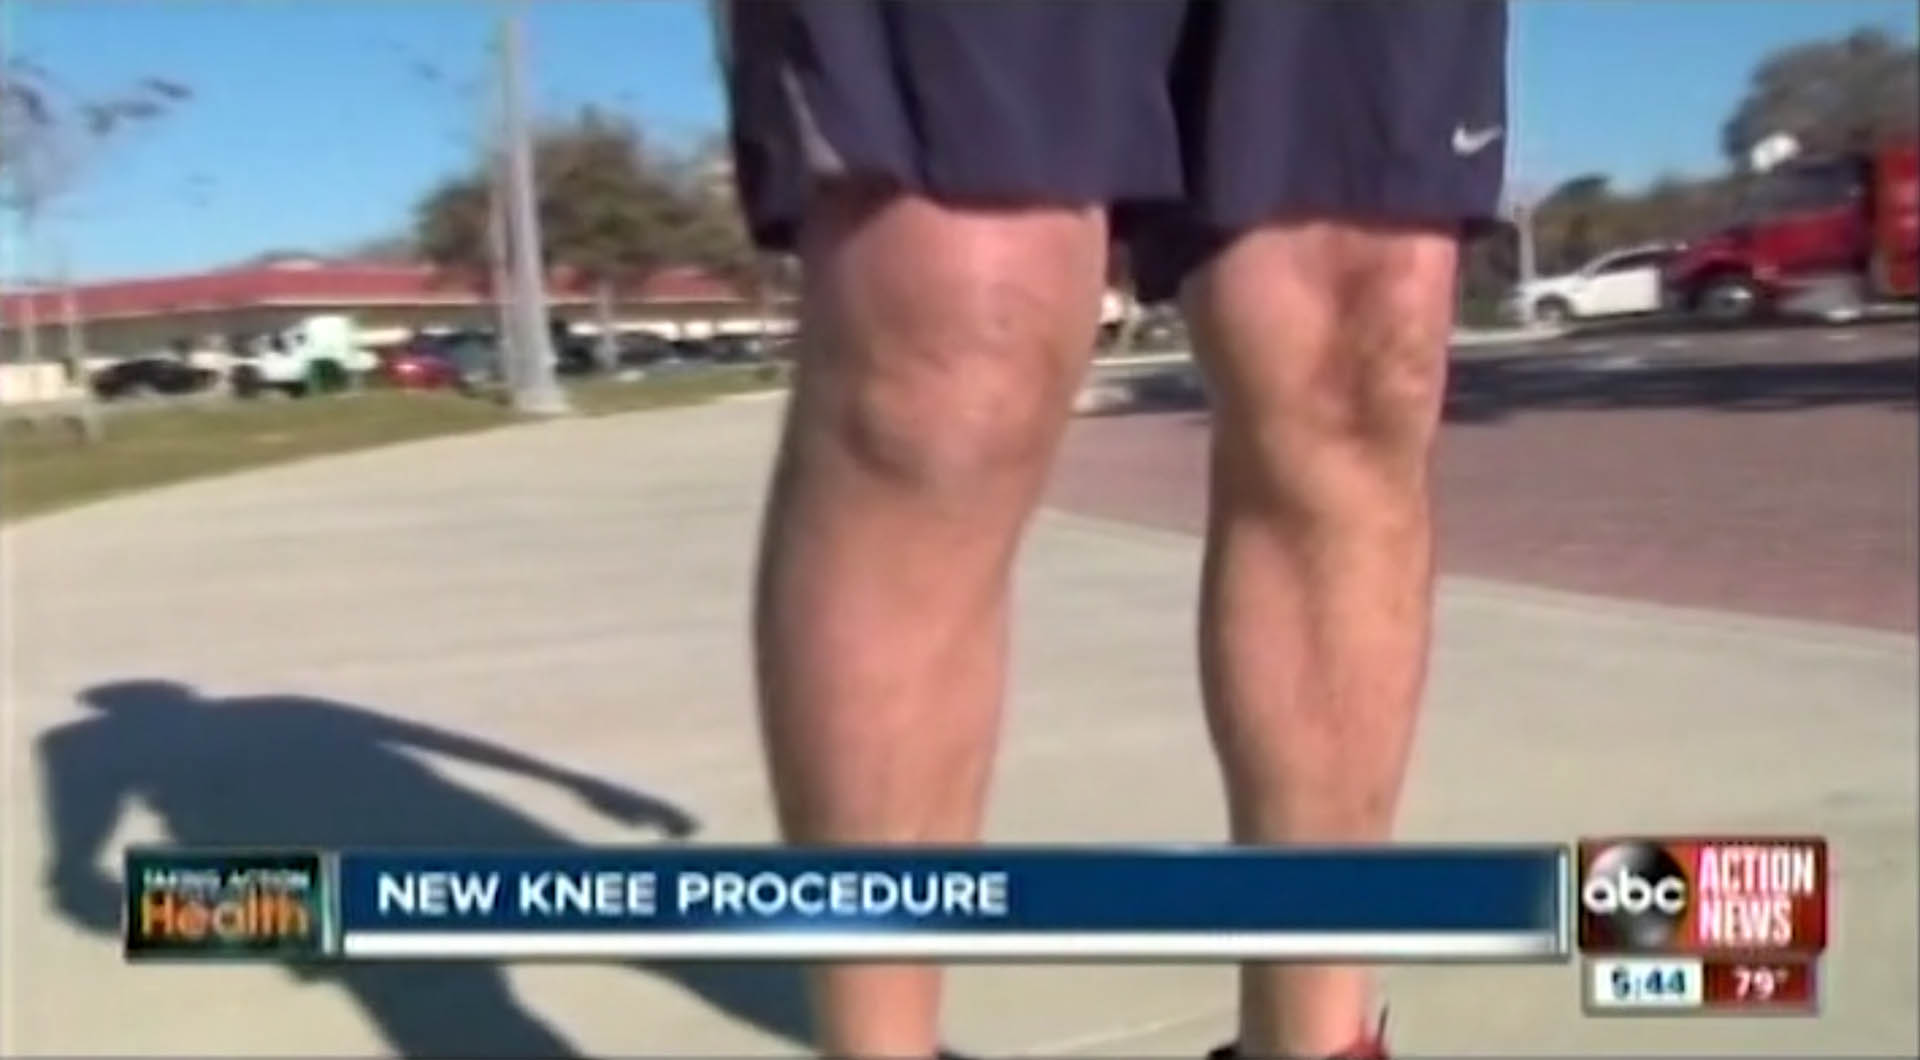 ABC News Patient Story - Signature Knee Replacement